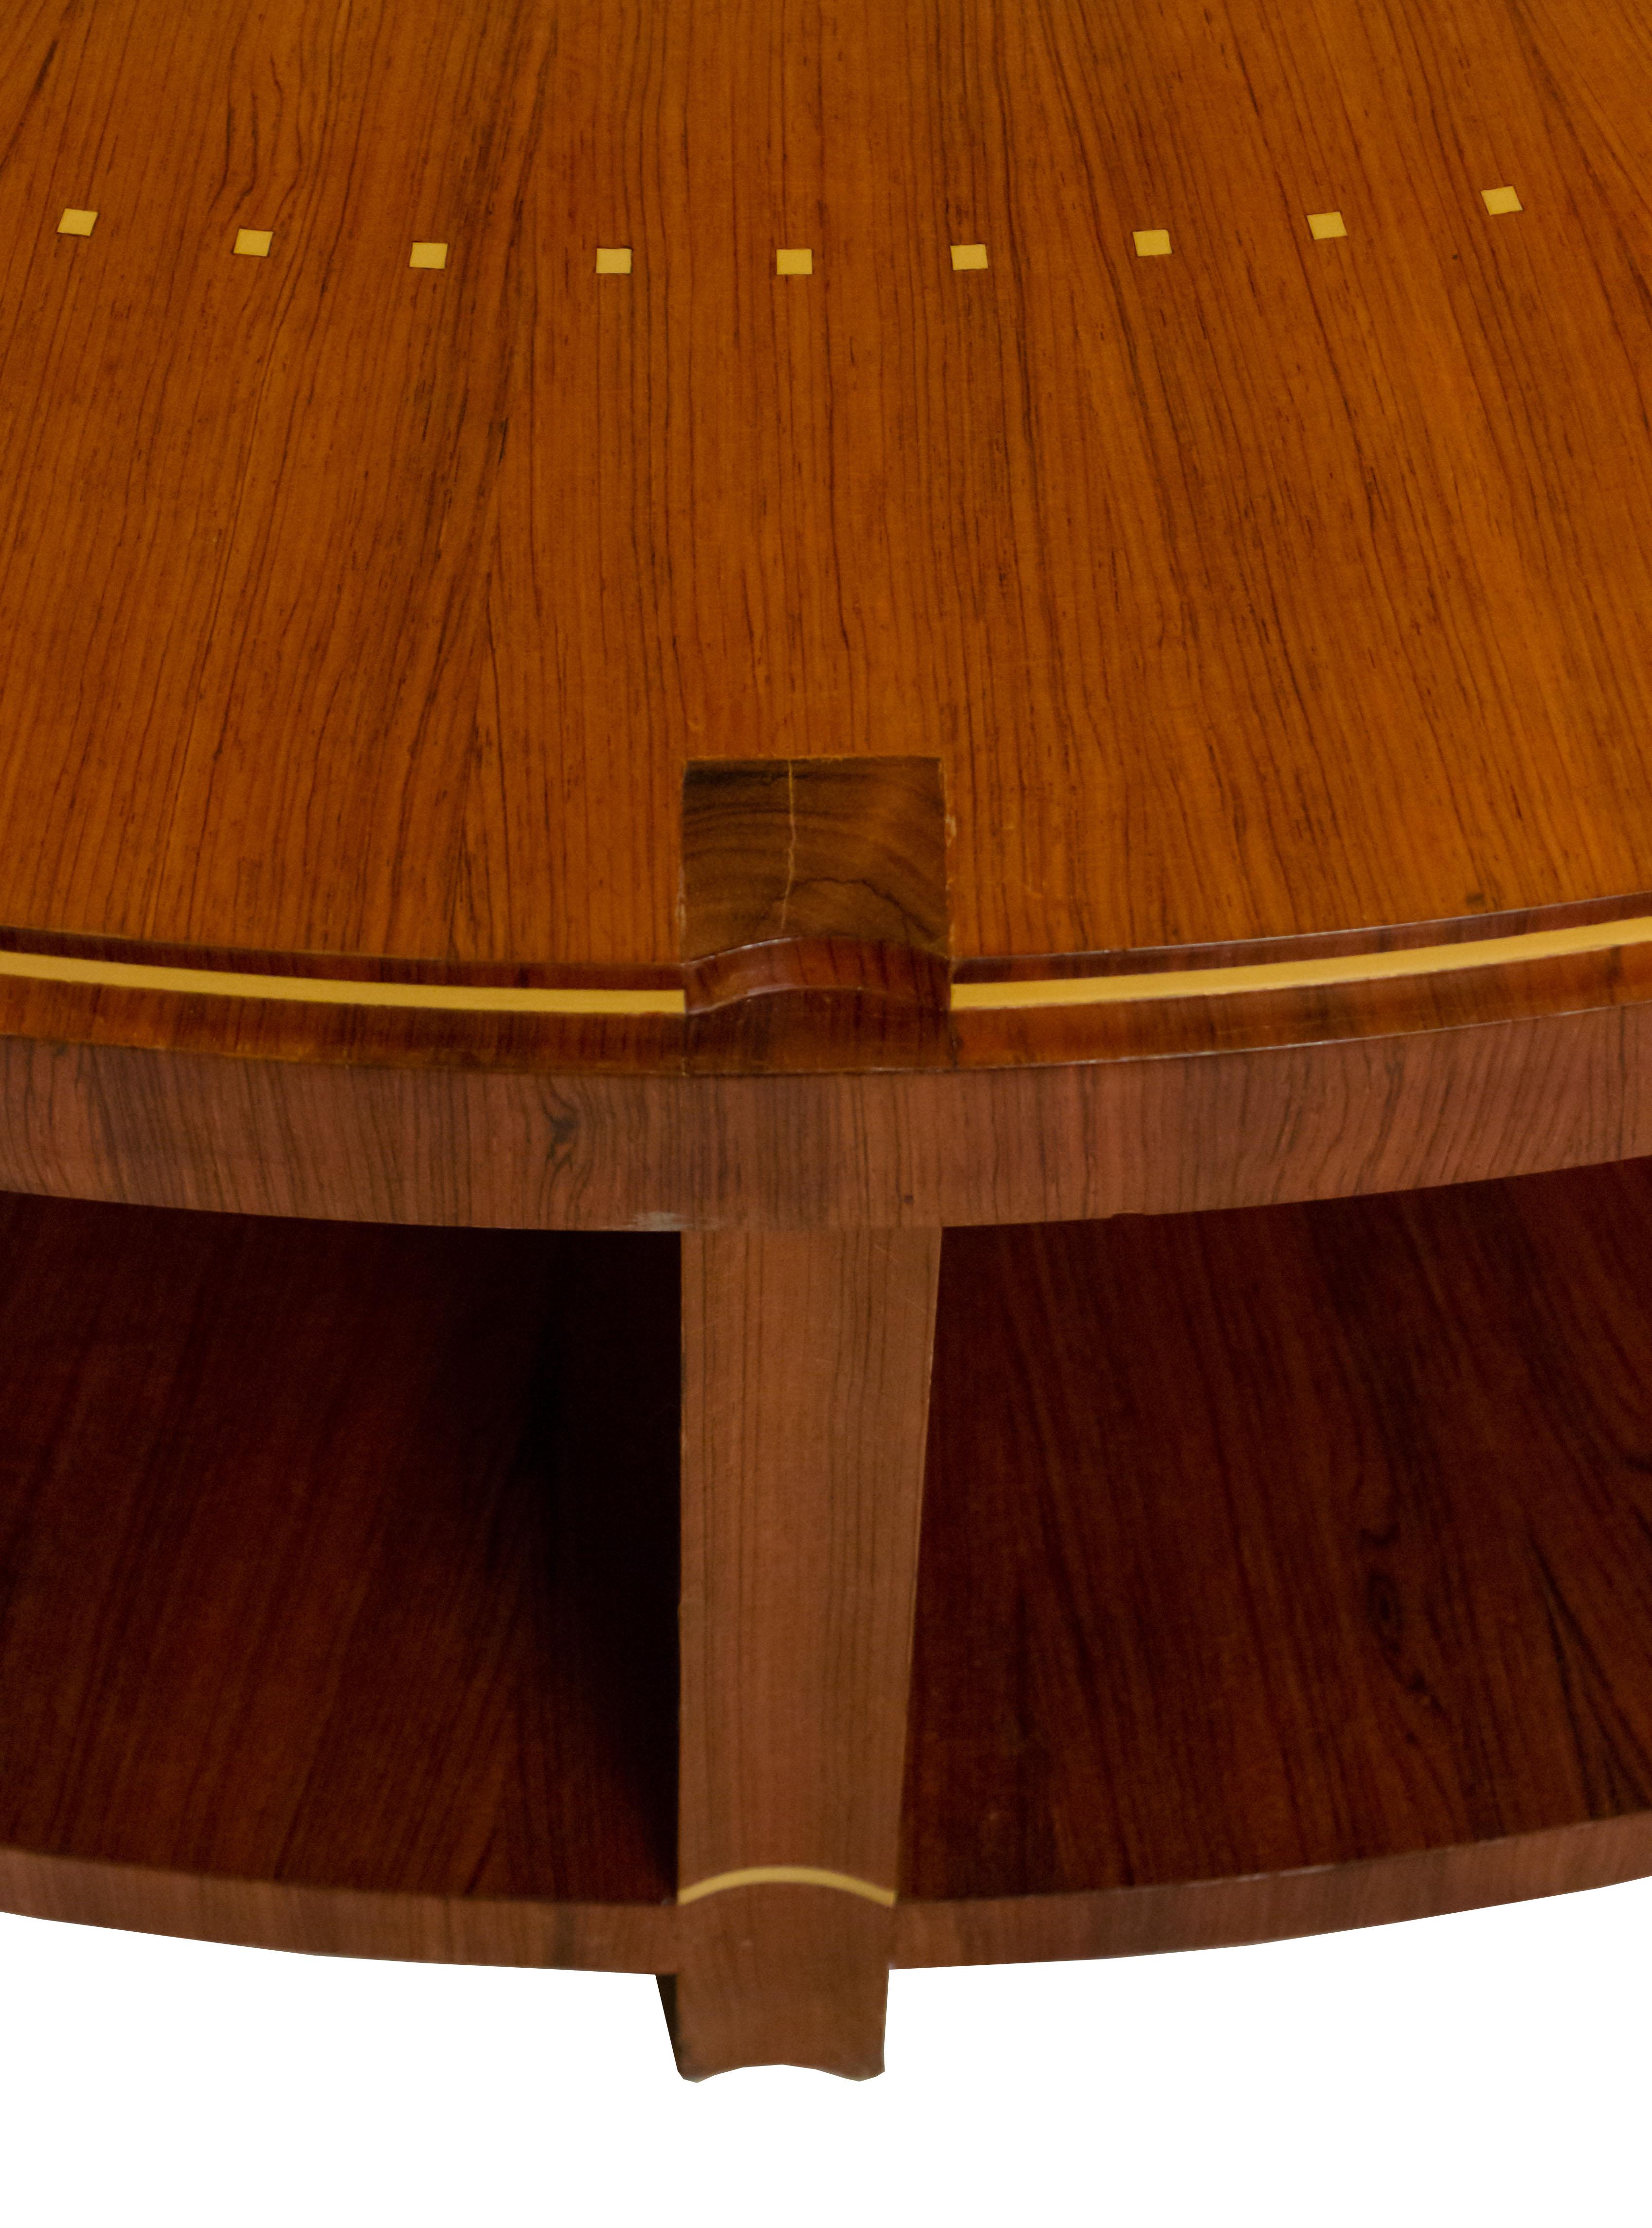 French Art Deco-style round rosewood coffee table with a radiating sunburst grain pattern inlaid with geometric designs along edge and trim supported on wooden columns connecting to a lower bottom shelf. (Manner of EMILE-JACQUES RUHLMANN).
   